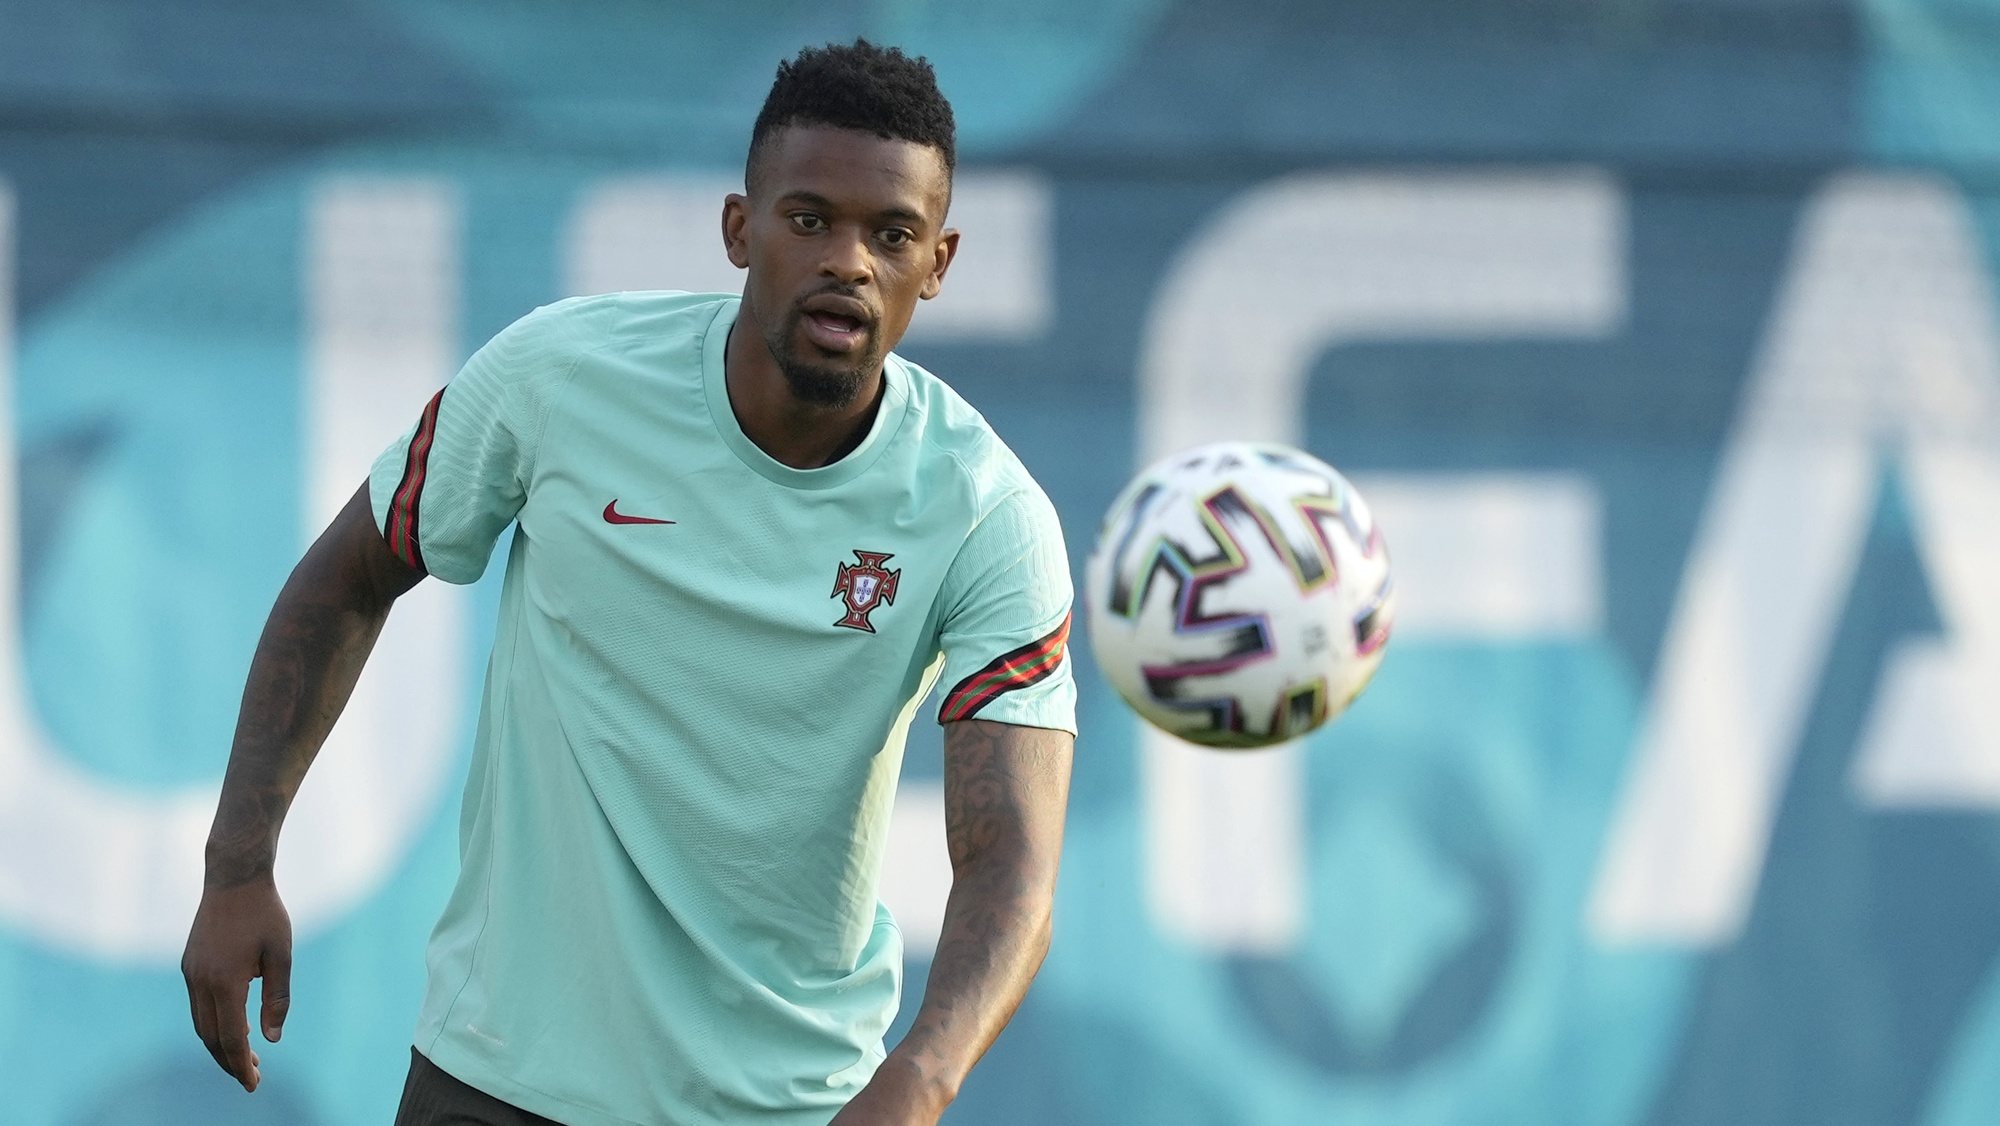 Portugal´s national soccer team players Nélson Semedo, during a training session at the Illovszky Rudolf Stadium, Hungay, 22 June 2021. Portugal will face France in their UEFA EURO 2020 group F round soccer match on 23 June 2021. HUGO DELGADO/LUSA